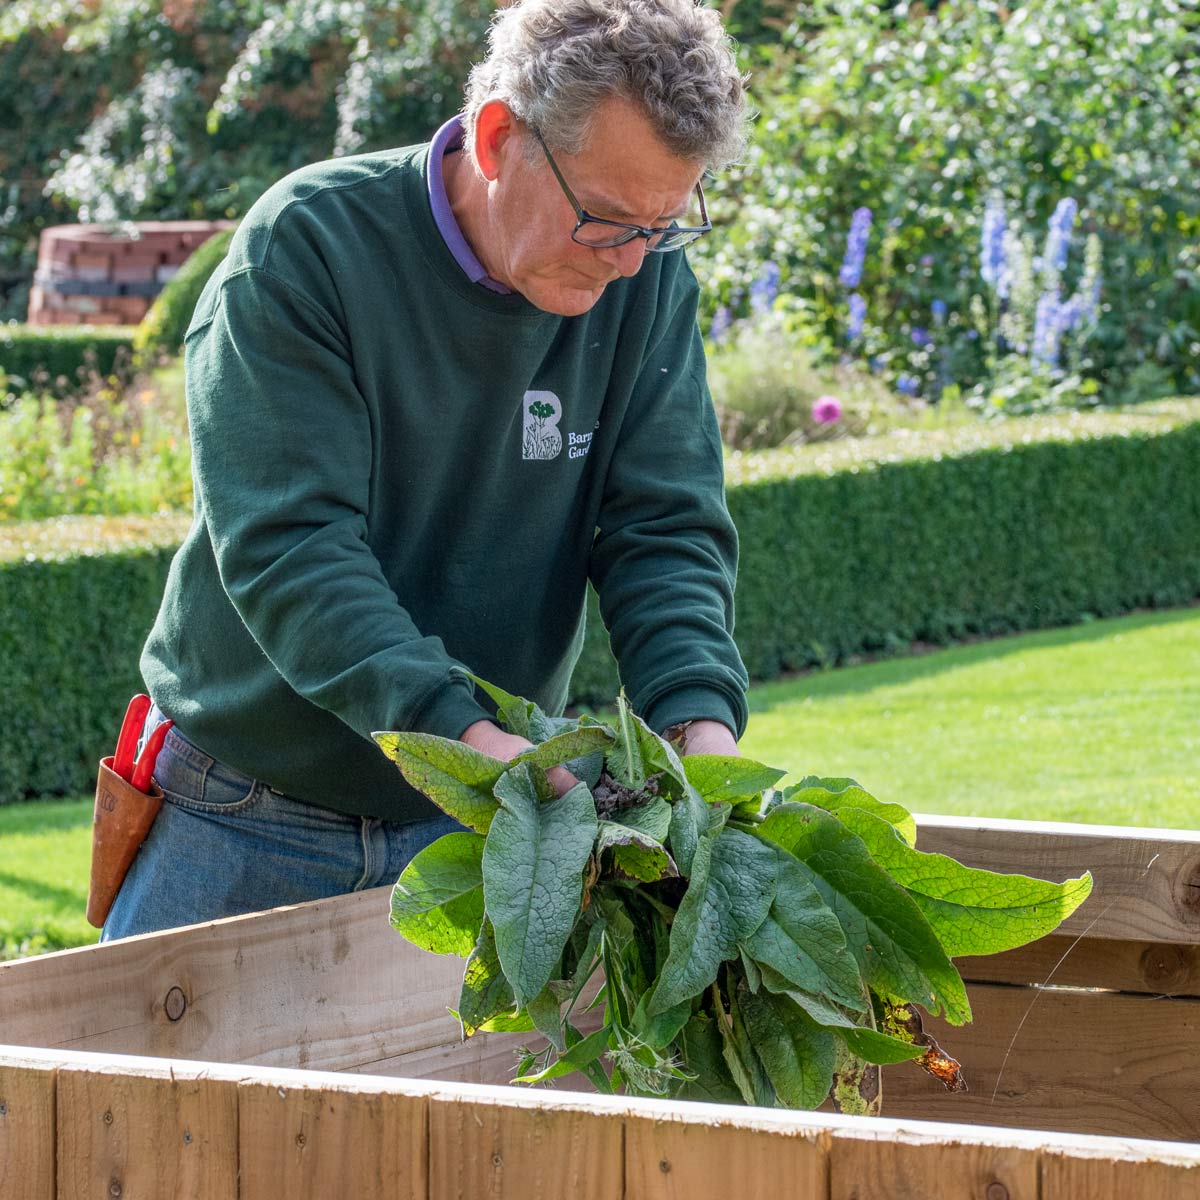 Composting course at Barnsdale gardens with Nick Hamilton